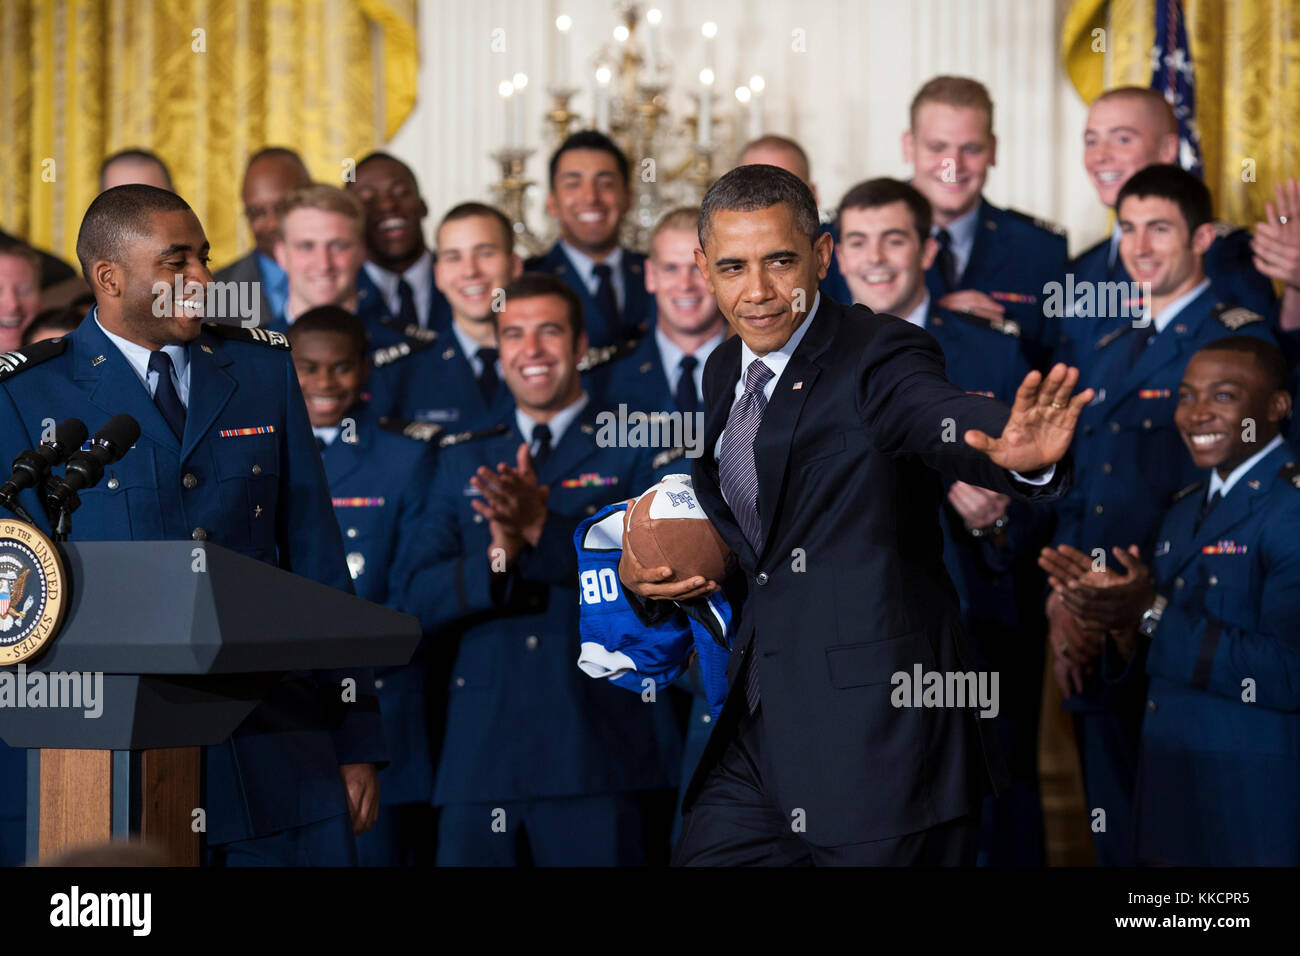 President Barack Obama strikes the Heisman pose after accepting a football from quarterback Tim Jefferson, left, during the Commander-in-Chief Trophy presentation to the United States Air Force Academy football team in the East Room of the White House, April 23, 2012. The Air Force beat Army and Navy in 2011 to claim the trophy for the 18th time. (Official White House Photo by Pete Souza)  This official White House photograph is being made available only for publication by news organizations and/or for personal use printing by the subject(s) of the photograph. The photograph may not be manipul Stock Photo